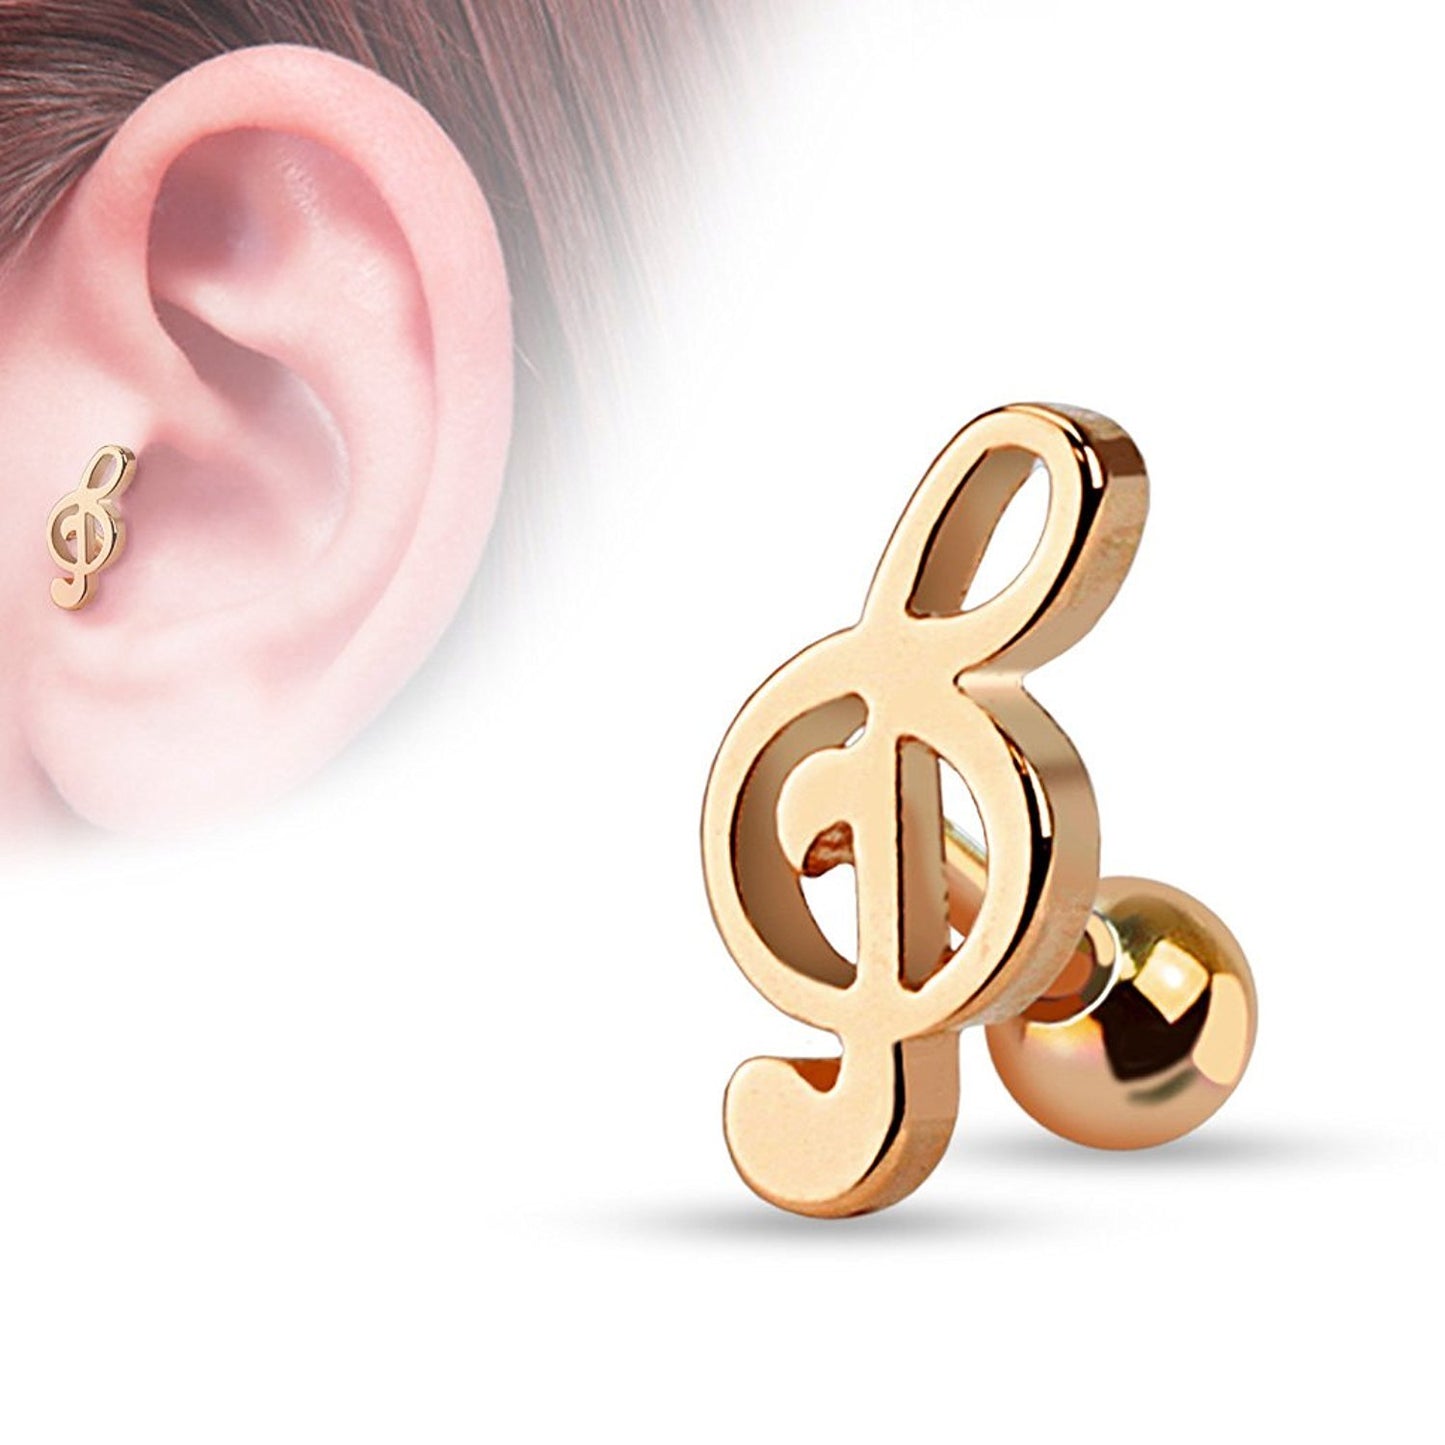 FIFTH CUE 16G Treble Clef Music Note Tragus Cartilage Piercing Stud